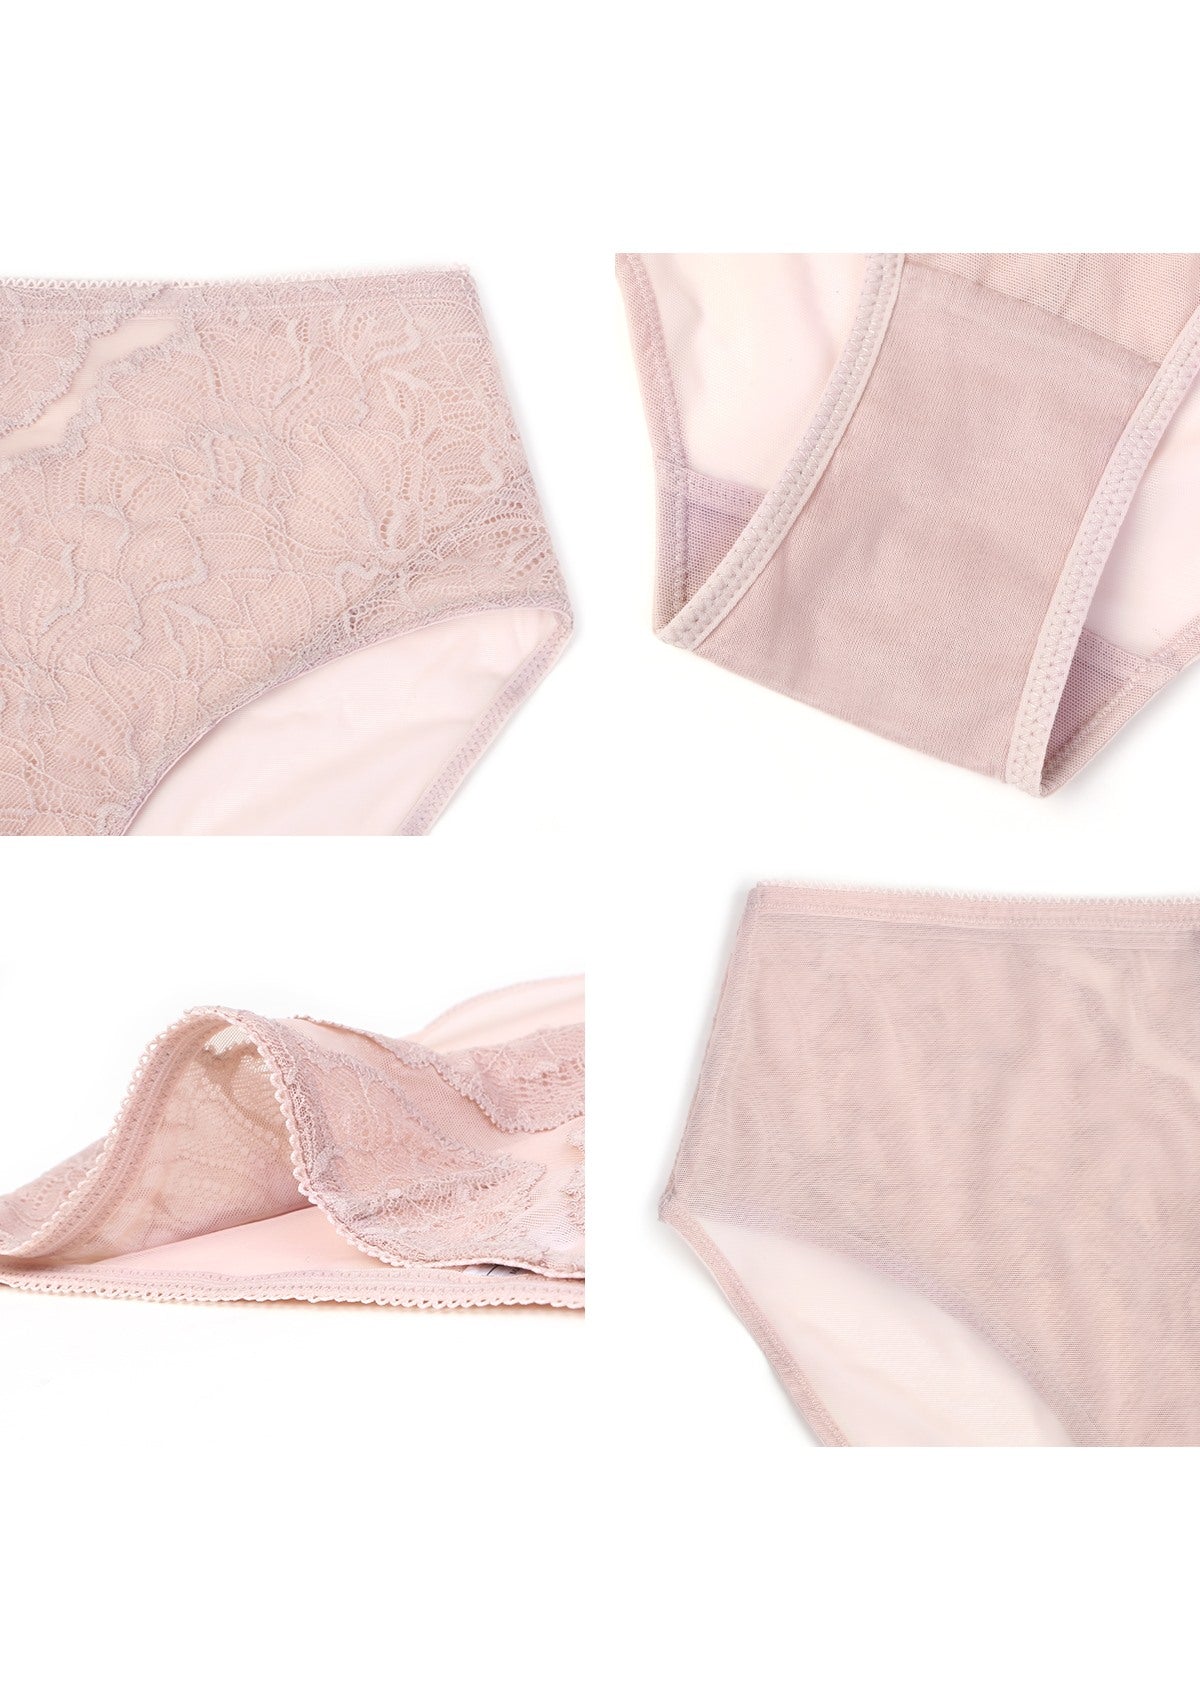 HSIA Blossom High-Rise Floral Lacy Panty-Comfort In Style - L / Dark Pink